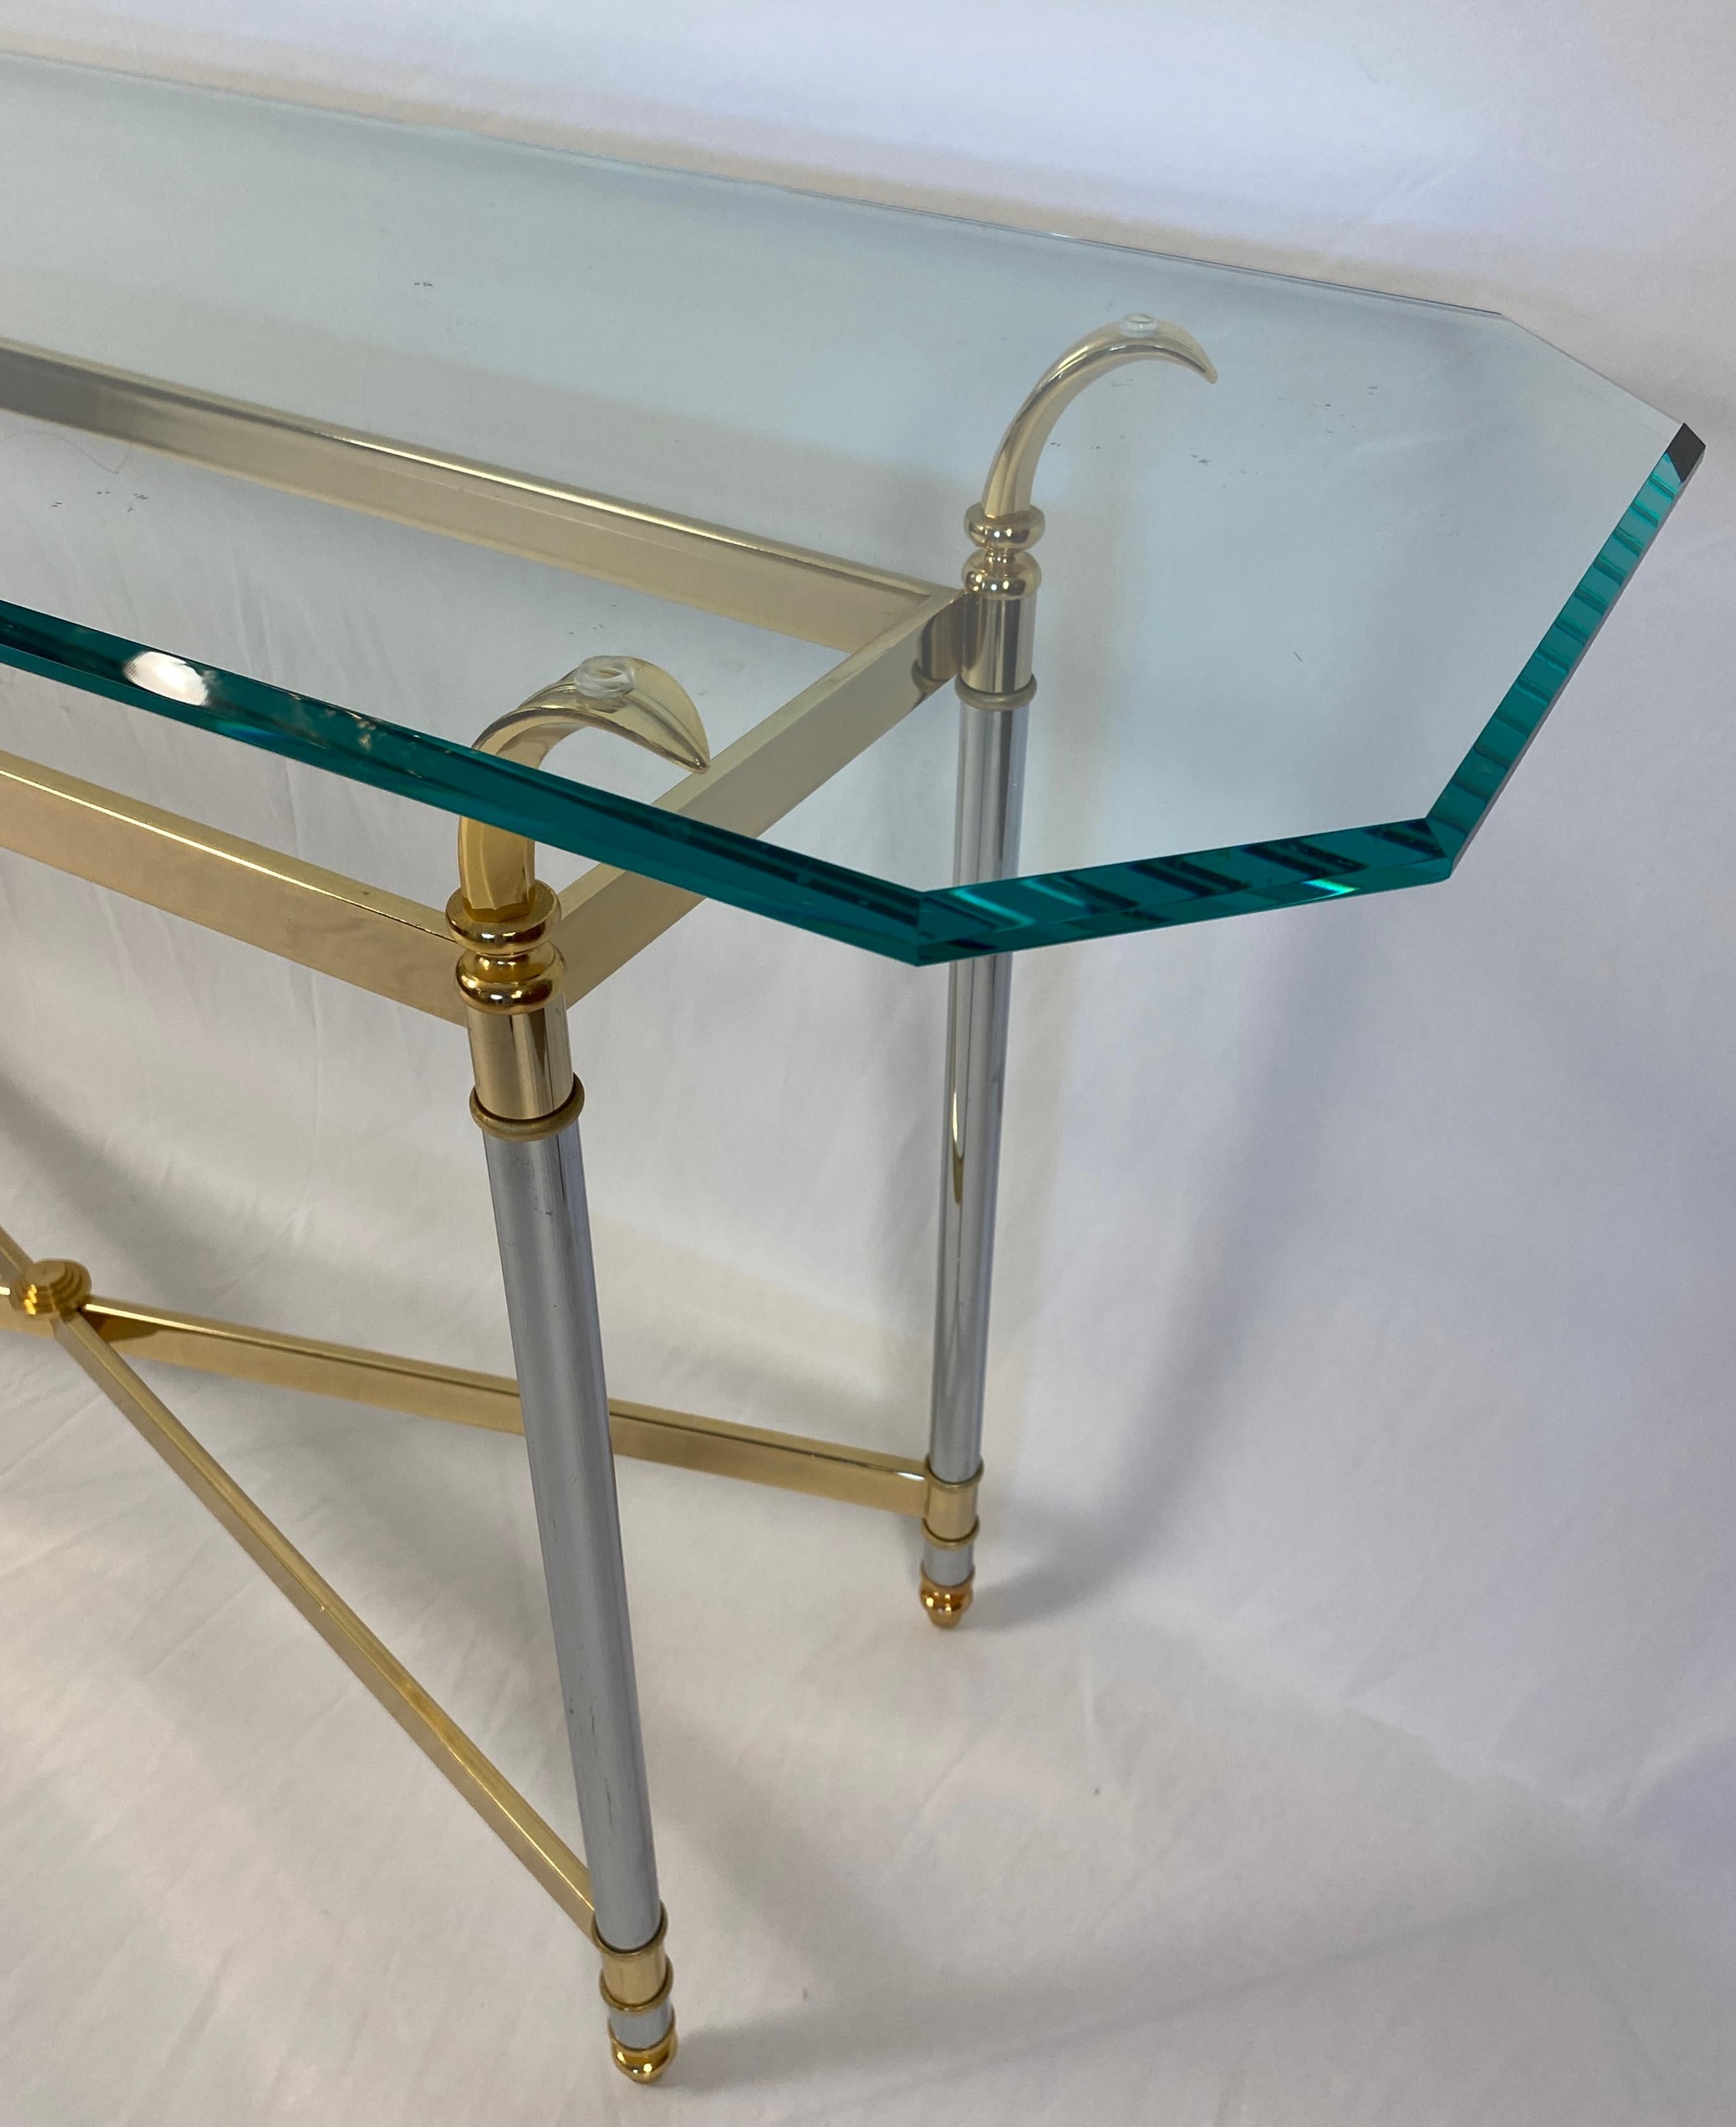 Elegant and stylish vintage Maison Jansen brass and glass console table or sofa table that measures 53